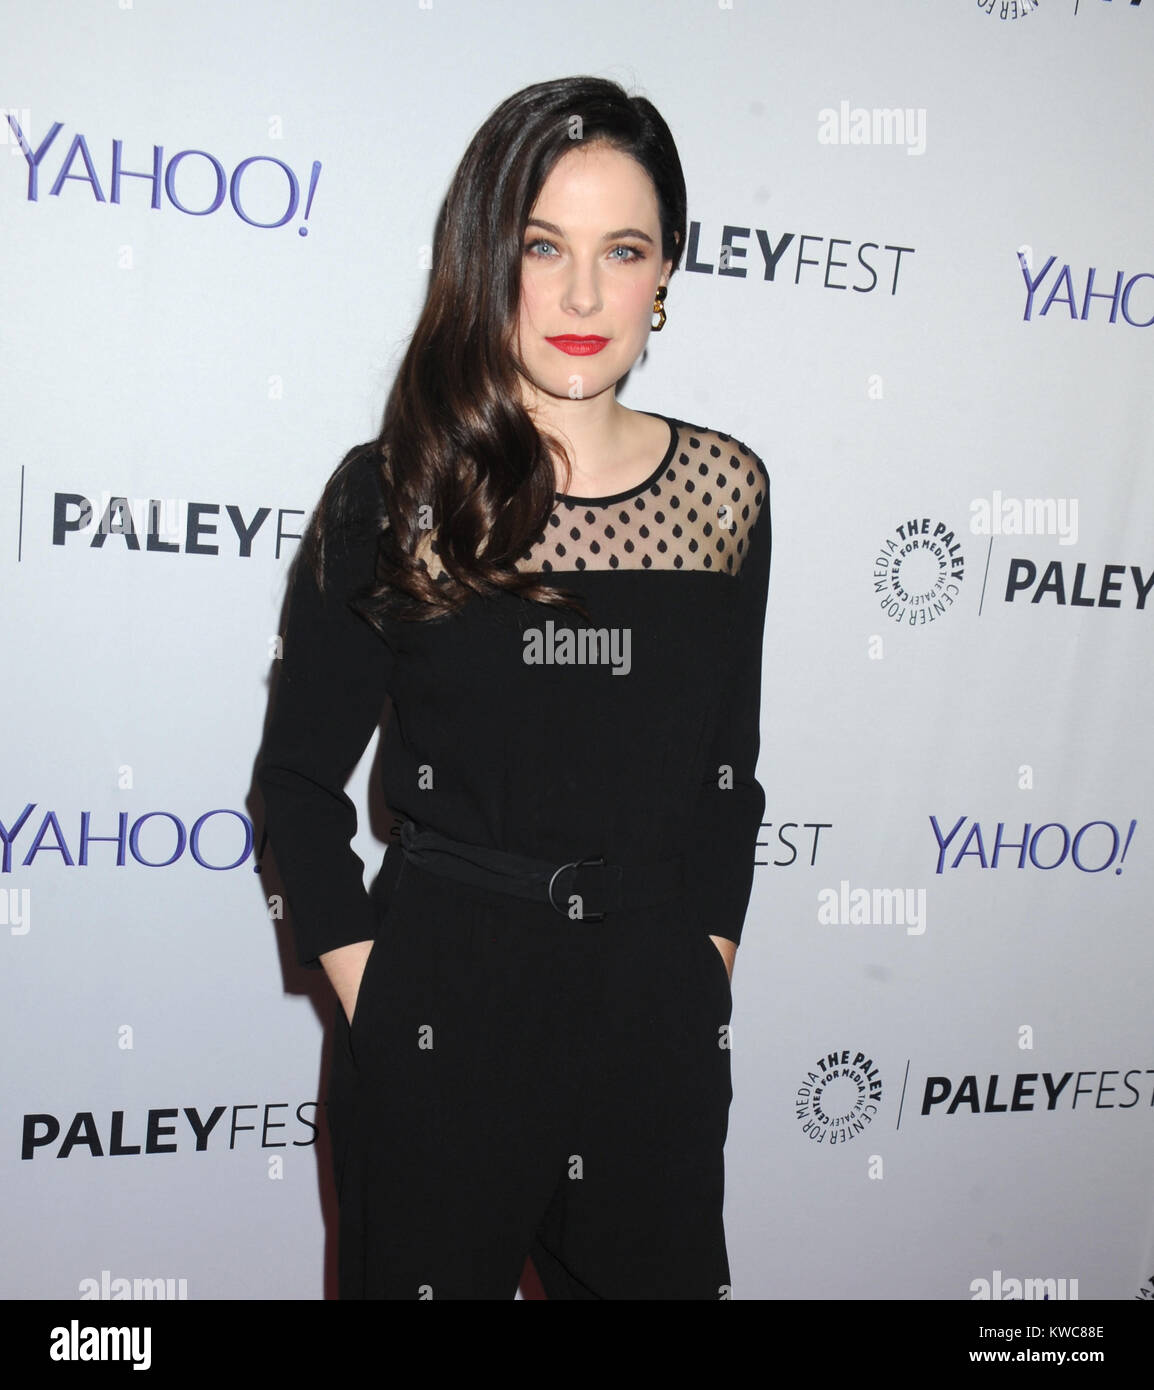 NEW YORK, NY - OCTOBER 18: Caroline Dhavernas attends the 2nd Annual Paleyfest New York Presents: 'Hannibal' at Paley Center For Media on October 18, 2014 in New York, New York  People:  Caroline Dhavernas Stock Photo